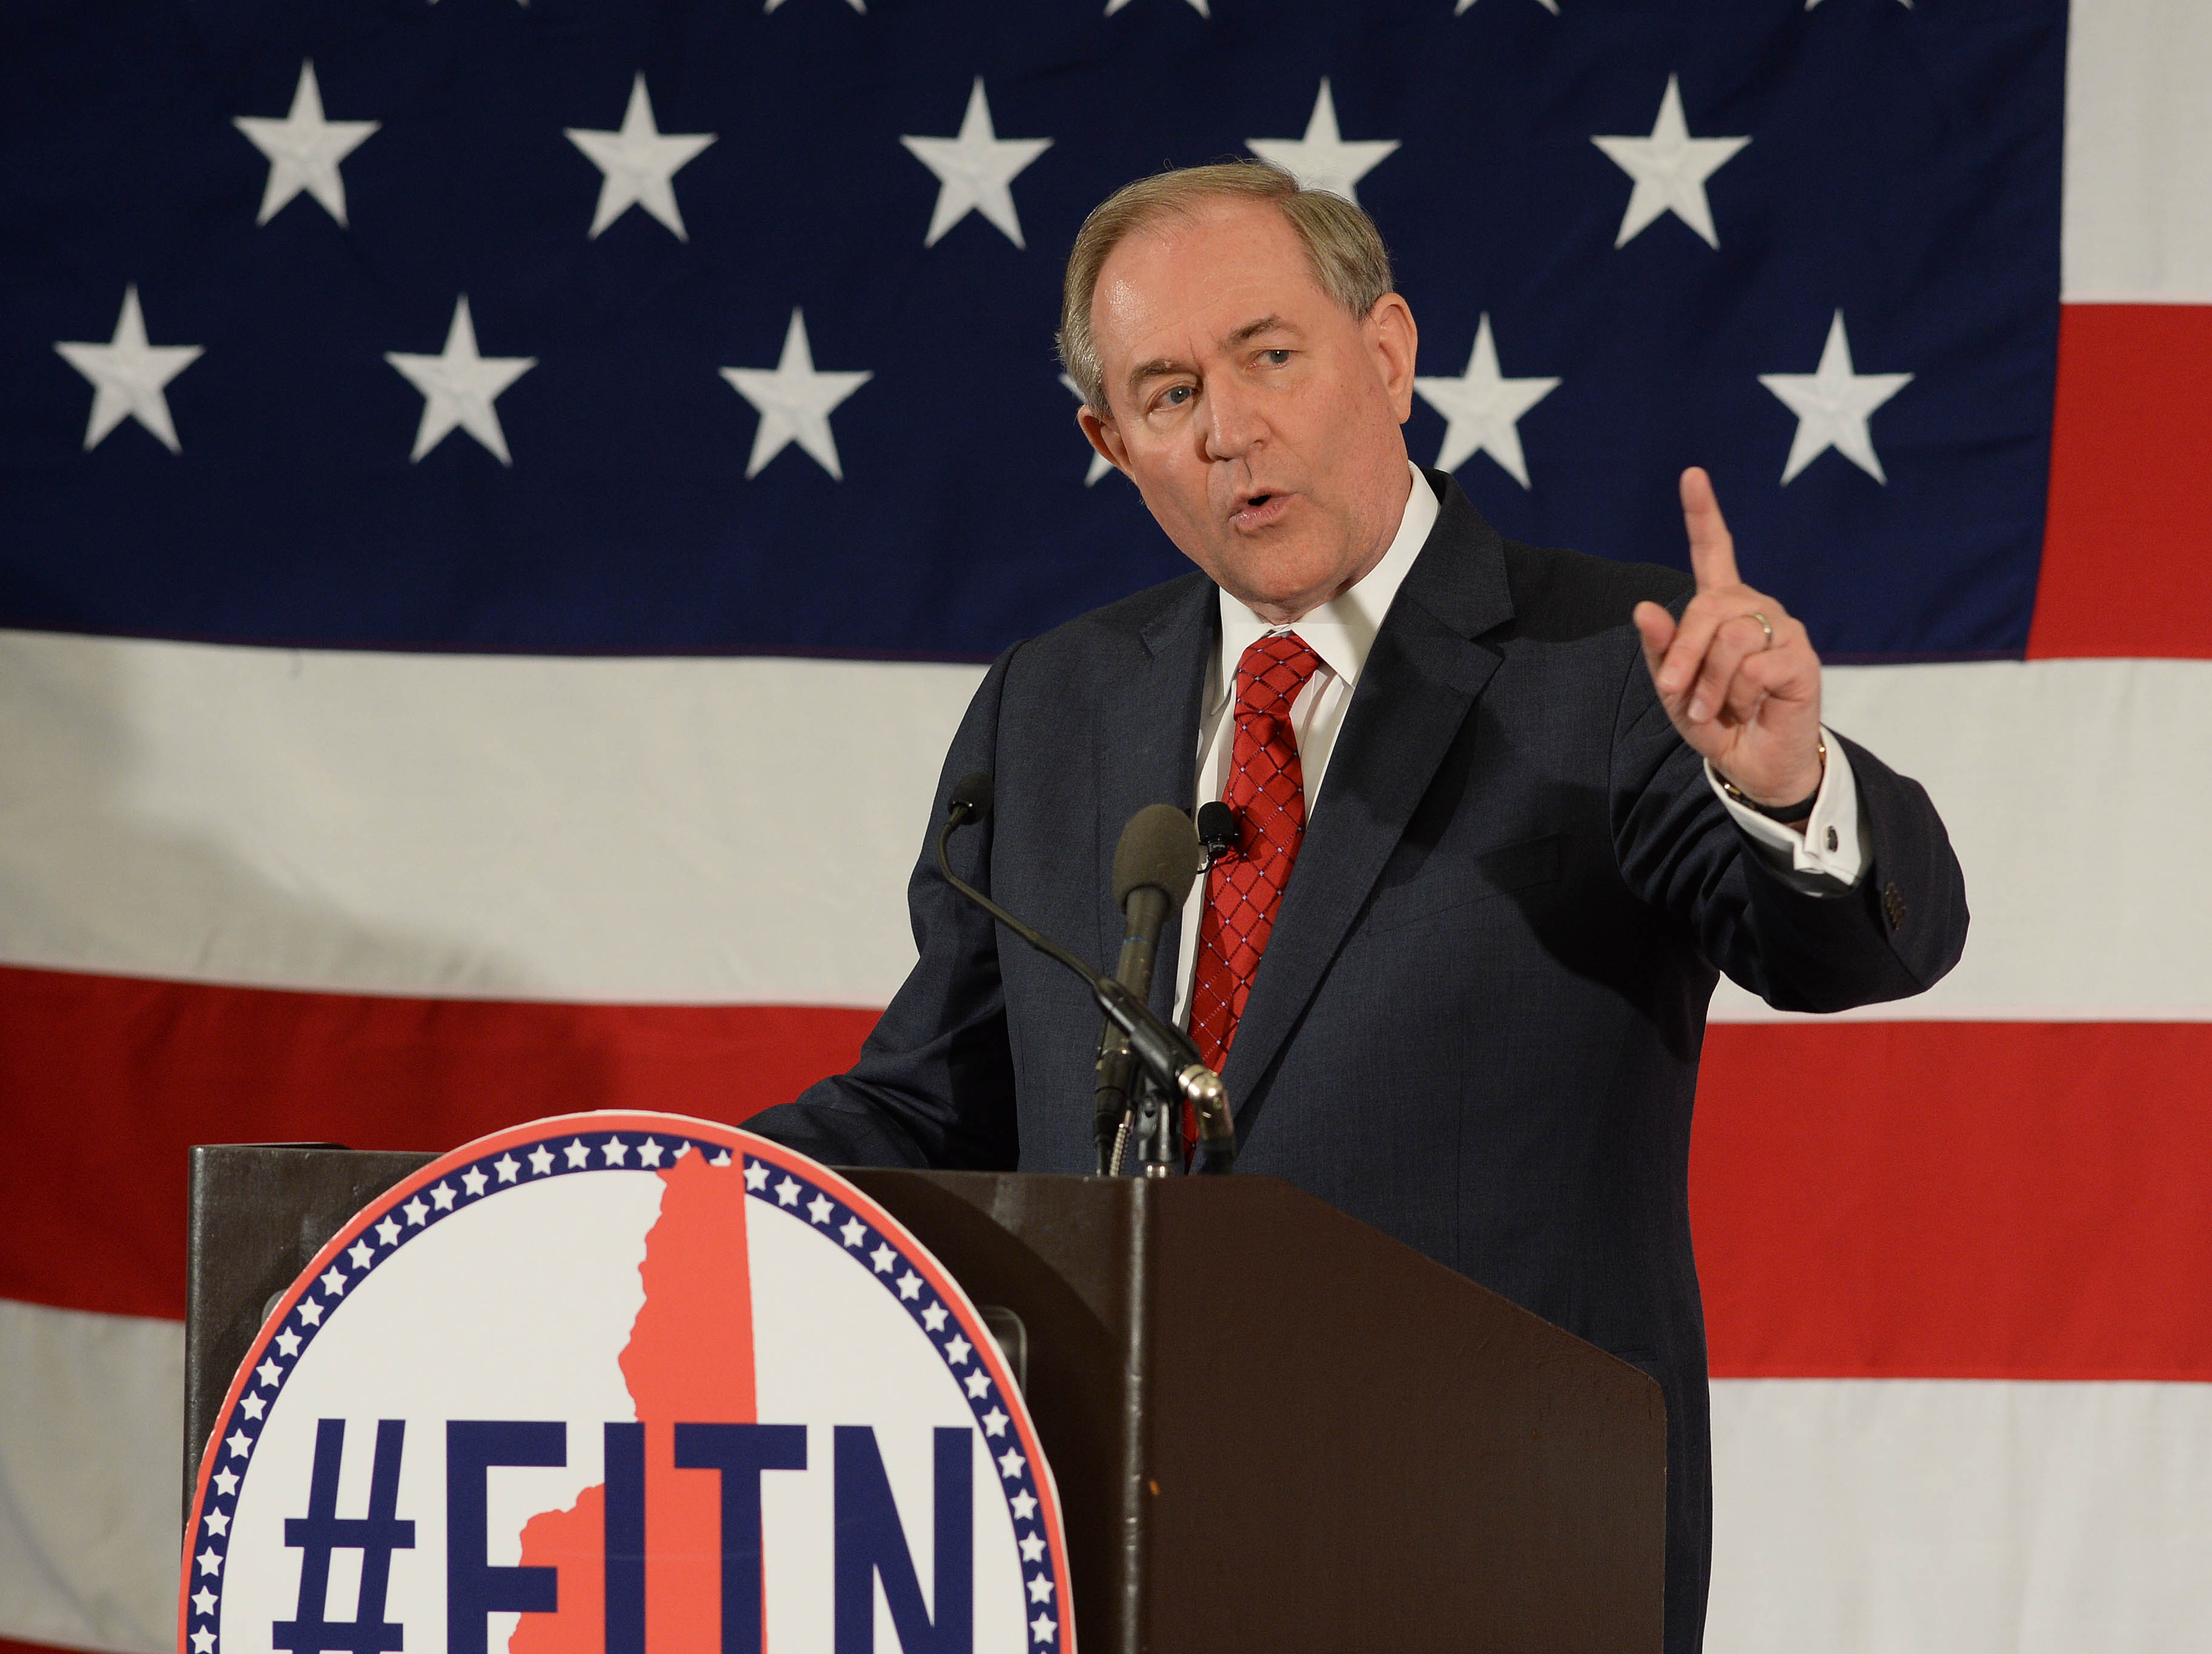 Former Virginia Gov. Jim Gilmore speaks at the First in the Nation Republican Leadership Summit on April 17, 2015, in Nashua, N.H. (Darren McCollester&mdash;Getty Images)